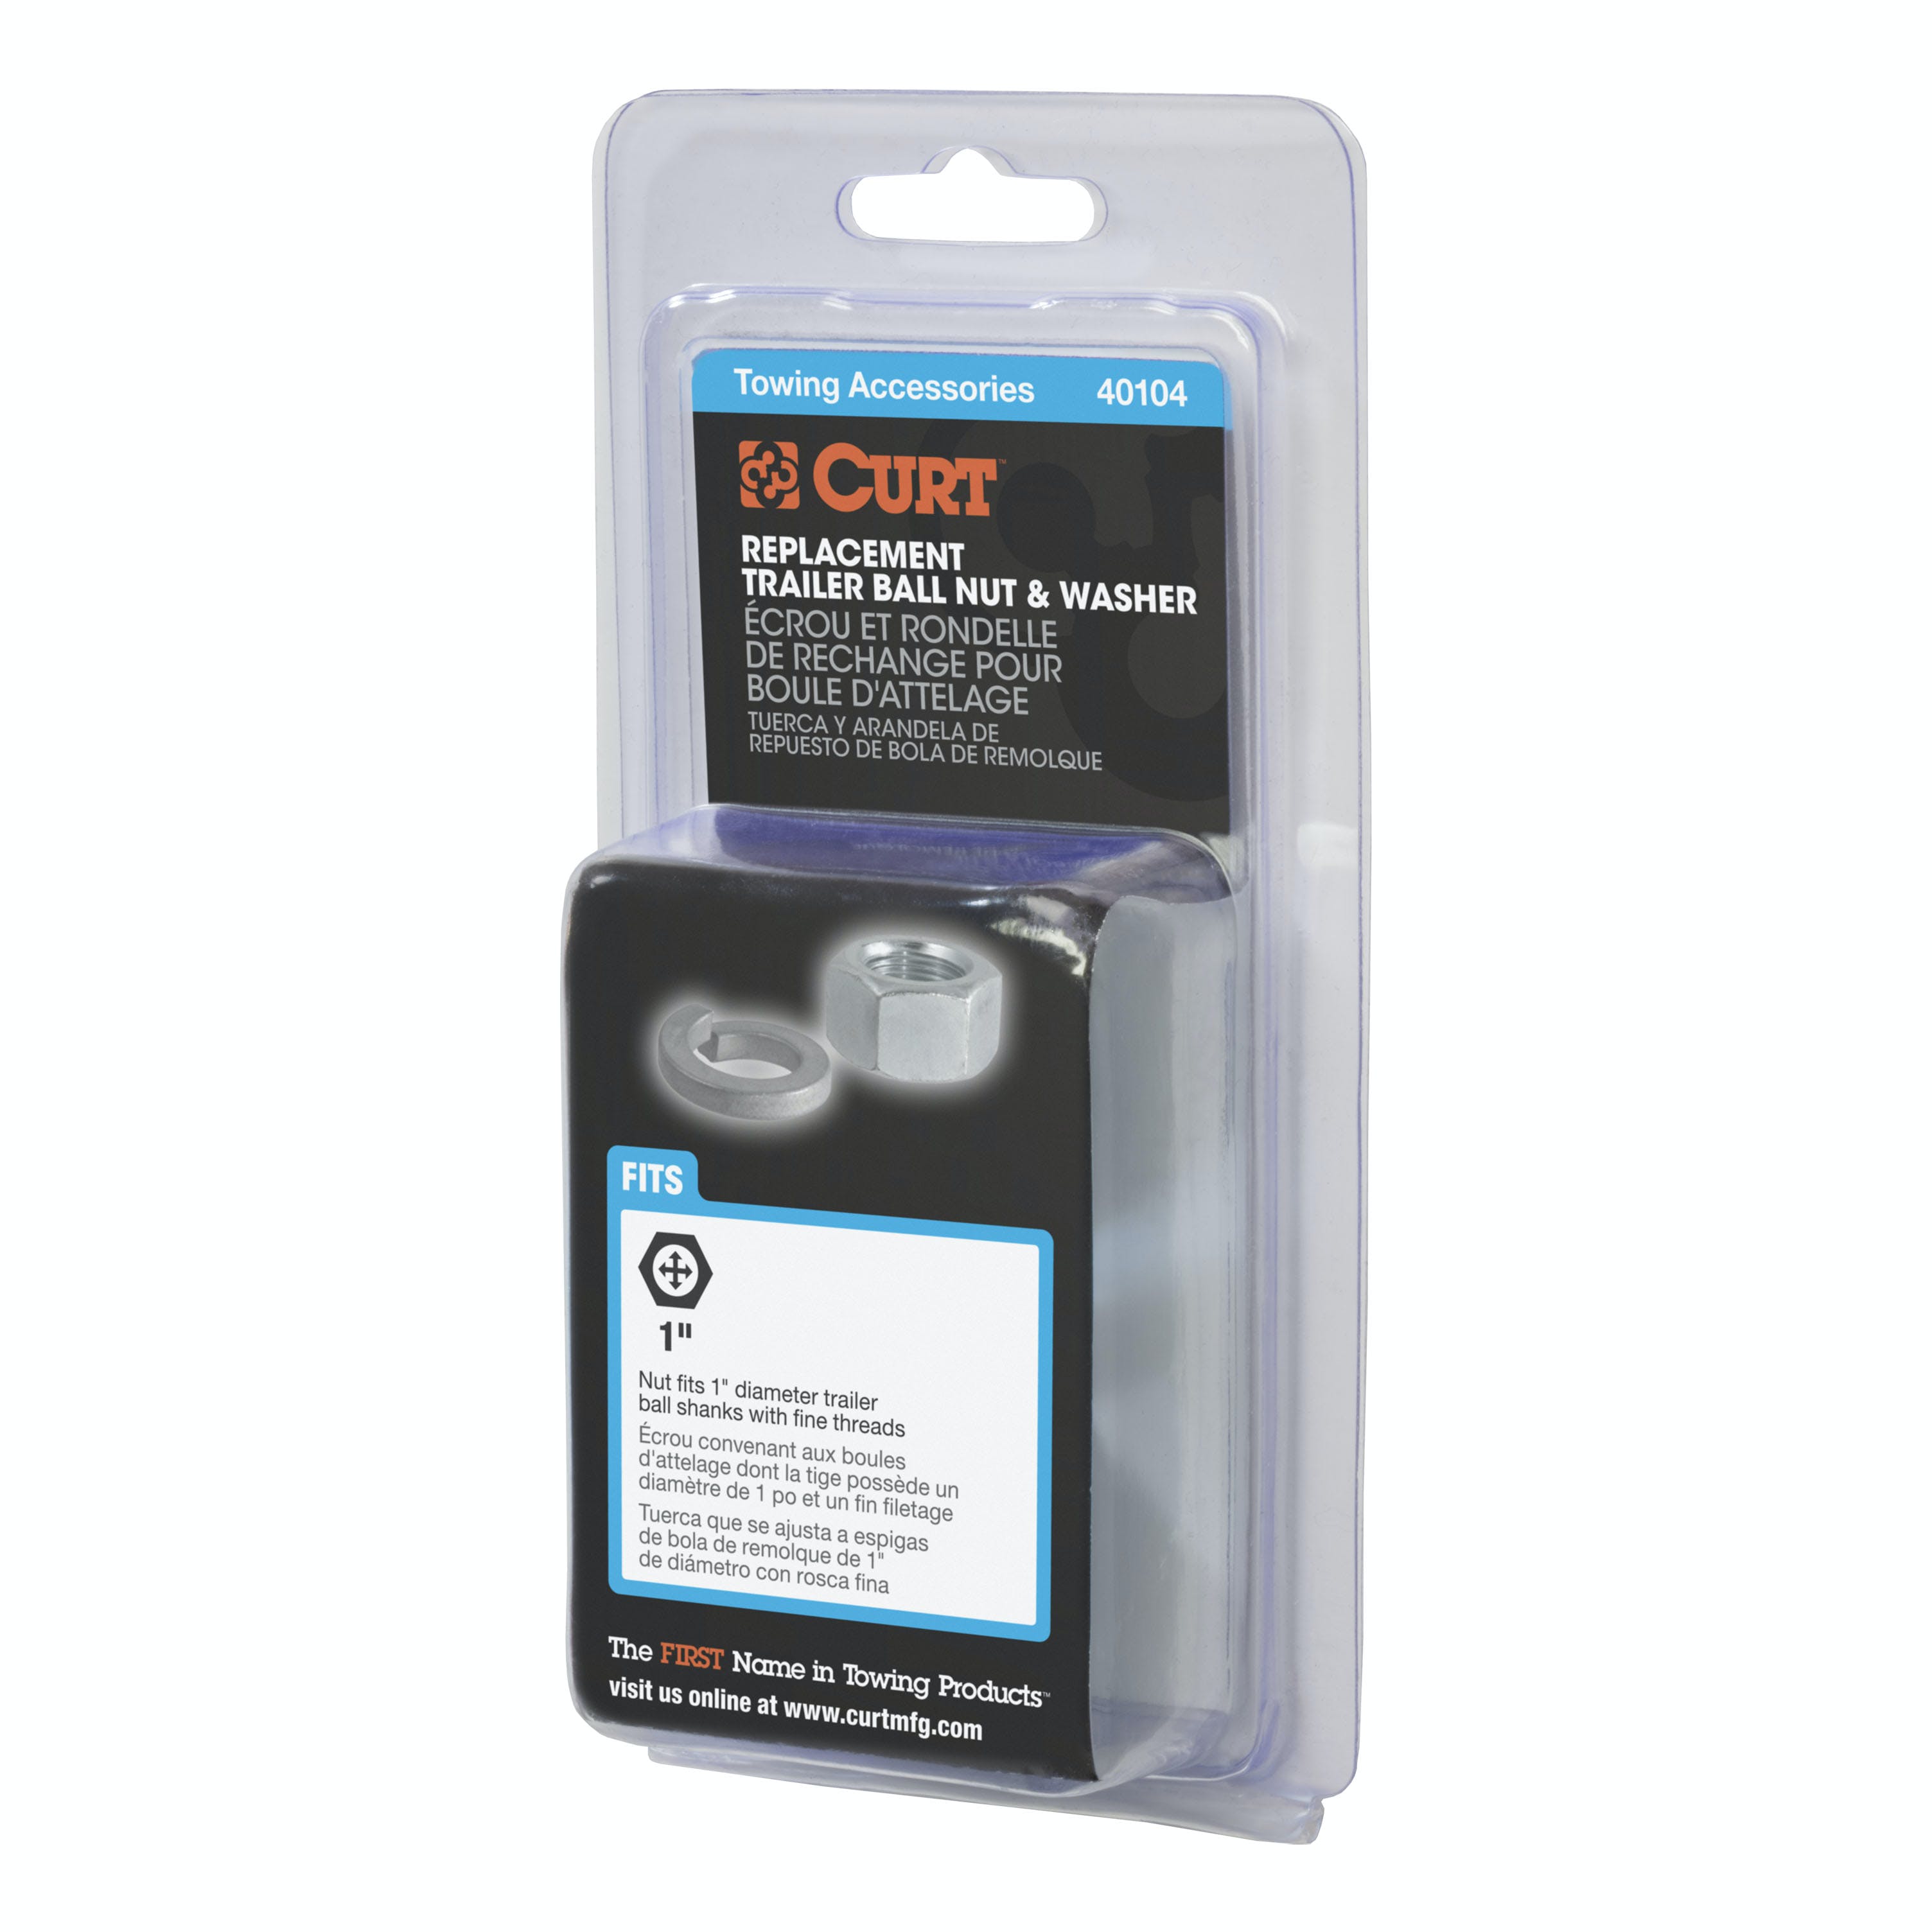 CURT 40104 Replacement Trailer Ball Nut and Washer for 1 Shank